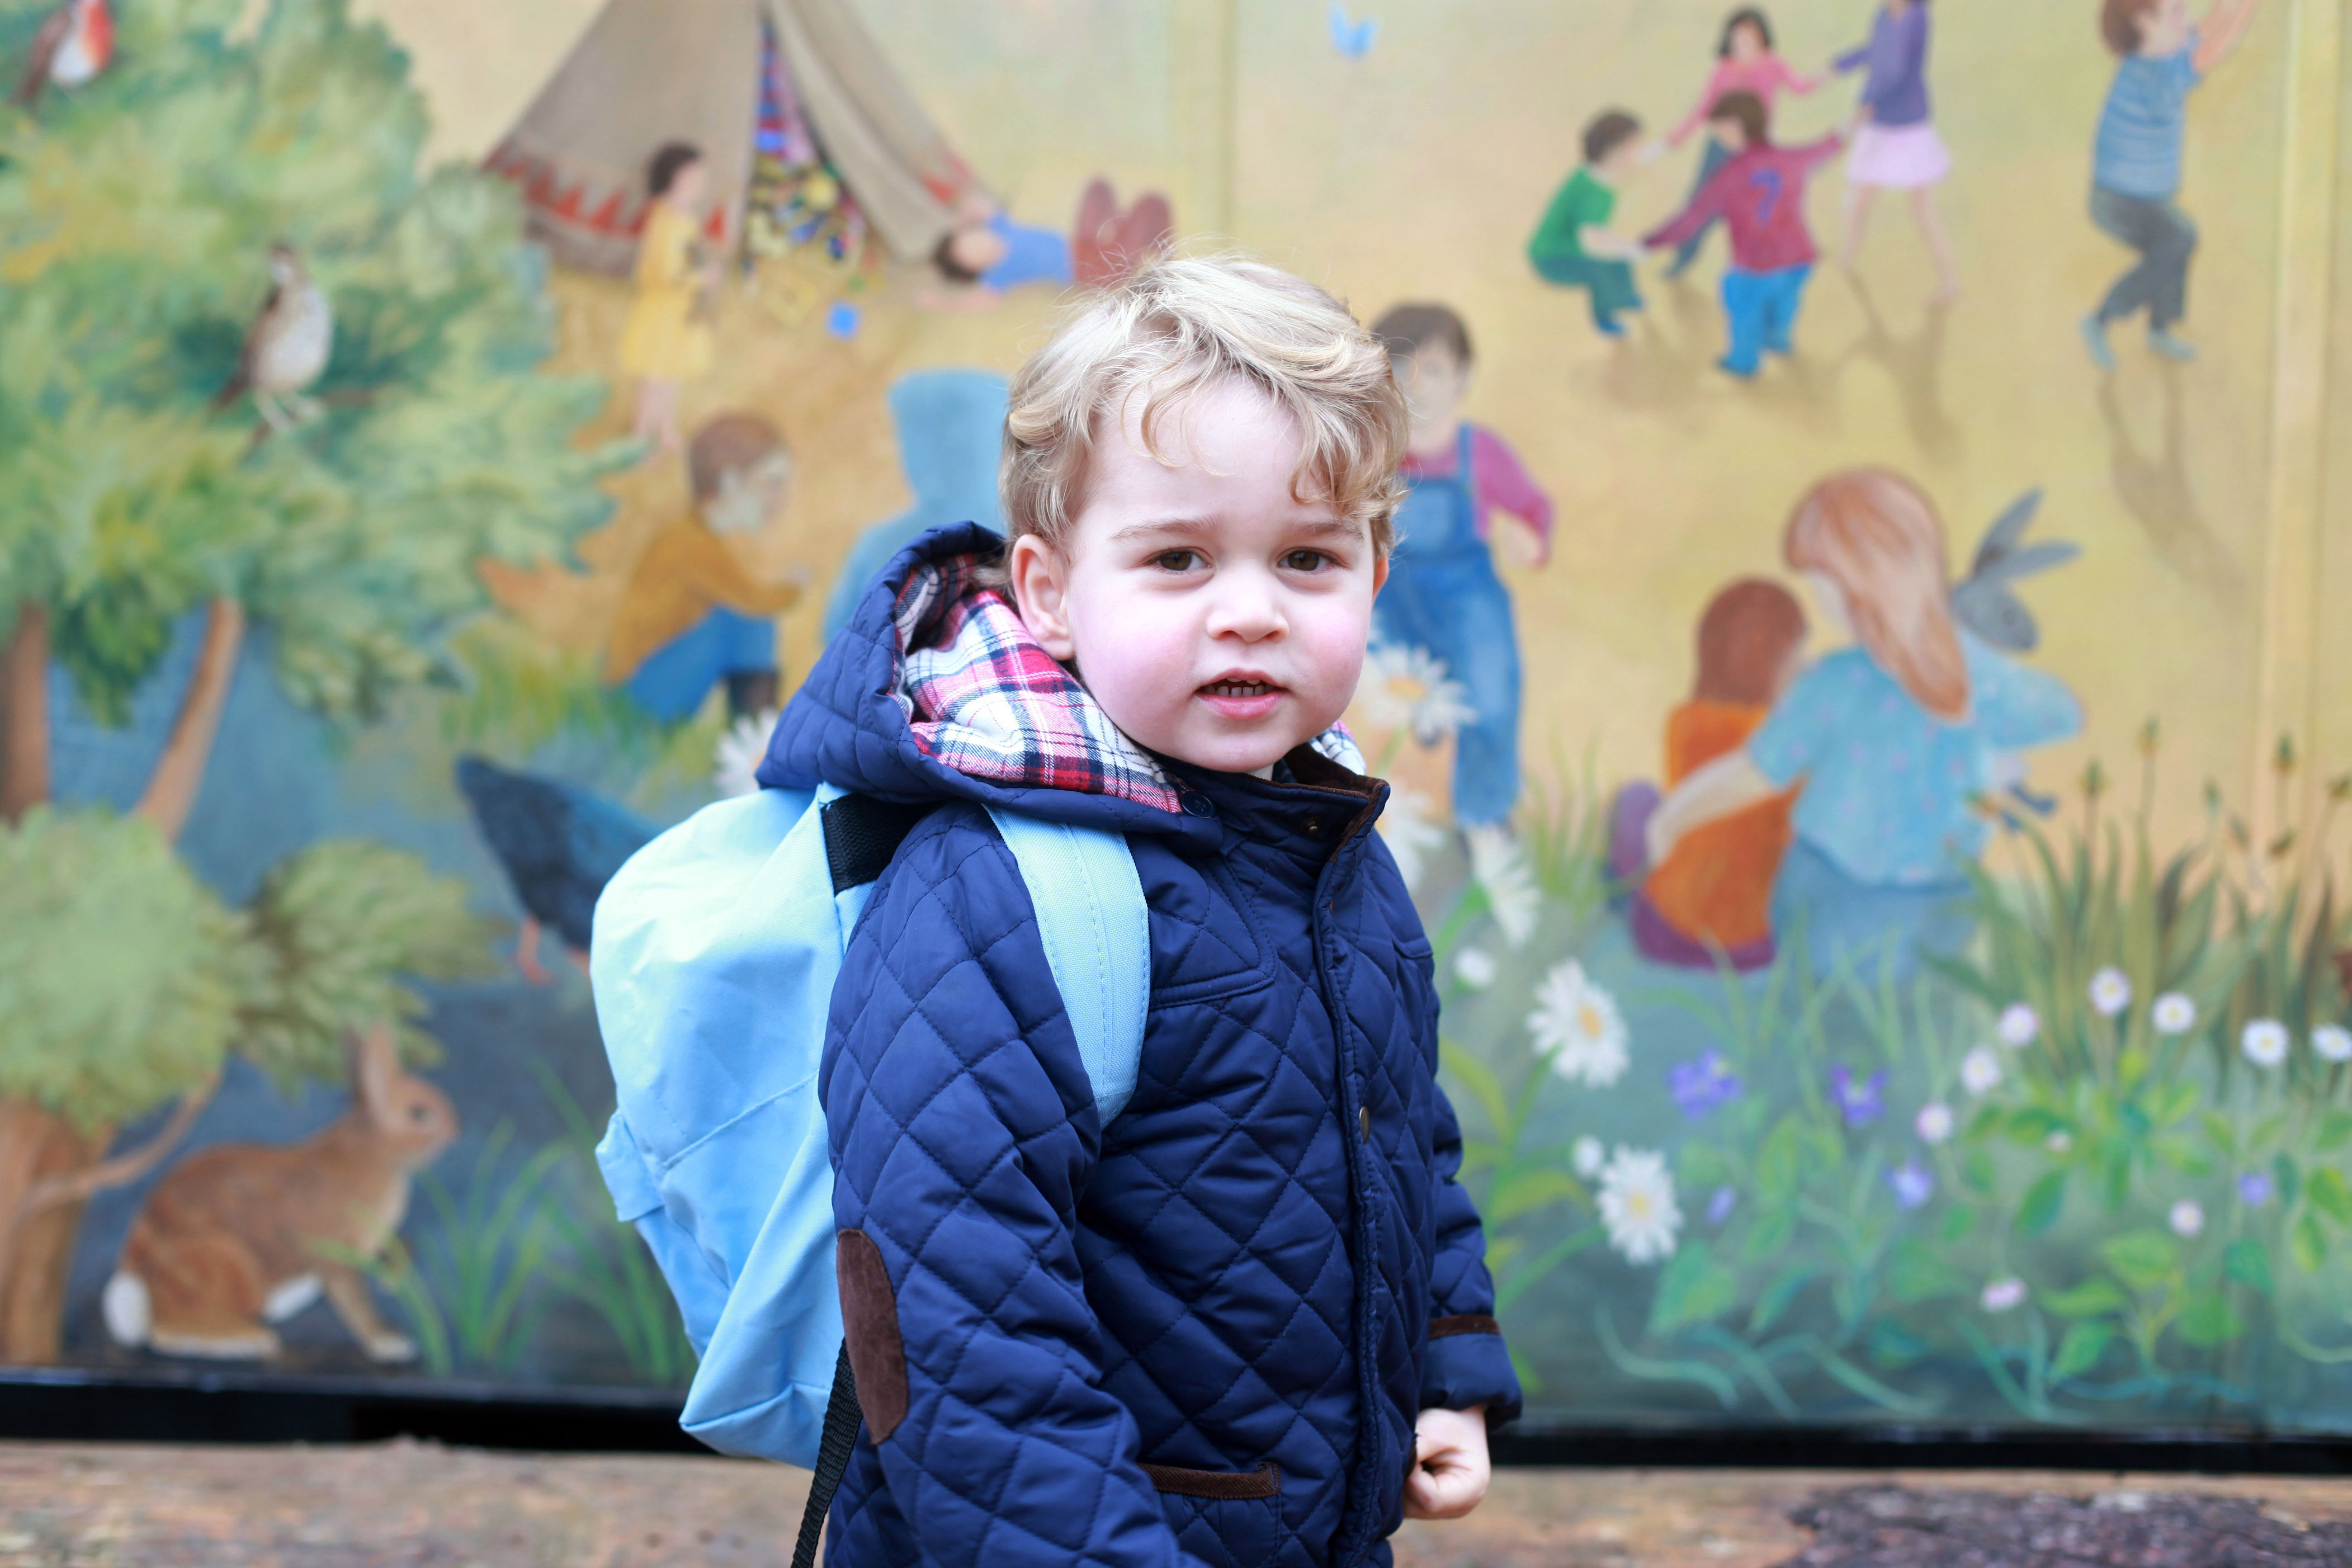 <p>Prince George posed for a pic on his first day at the Westacre Montessori nursery school near Sandringham in Norfolk, England, on Jan. 6, 2016.</p>